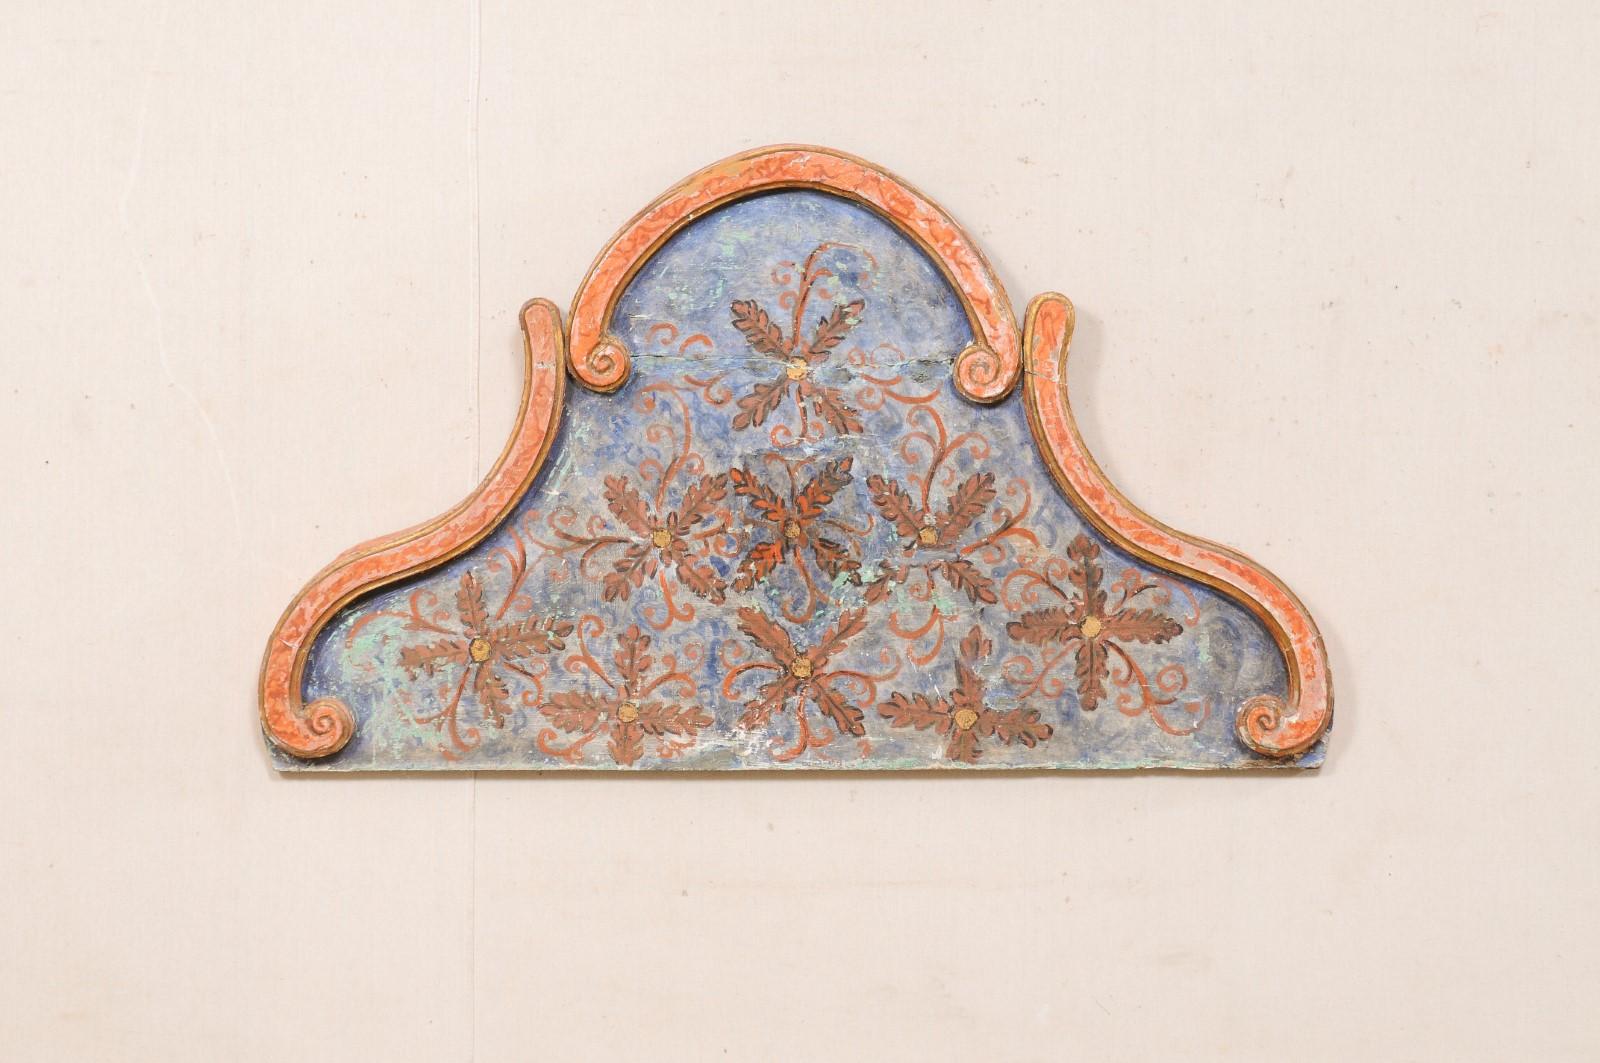 A Spanish carved-wood wall hanging pediment with it's original painted finish from the 19th century. This antique wooden architectural plaque, which is approximately 4.25 feet in length, has an arched shape which is framed with three raised delicate